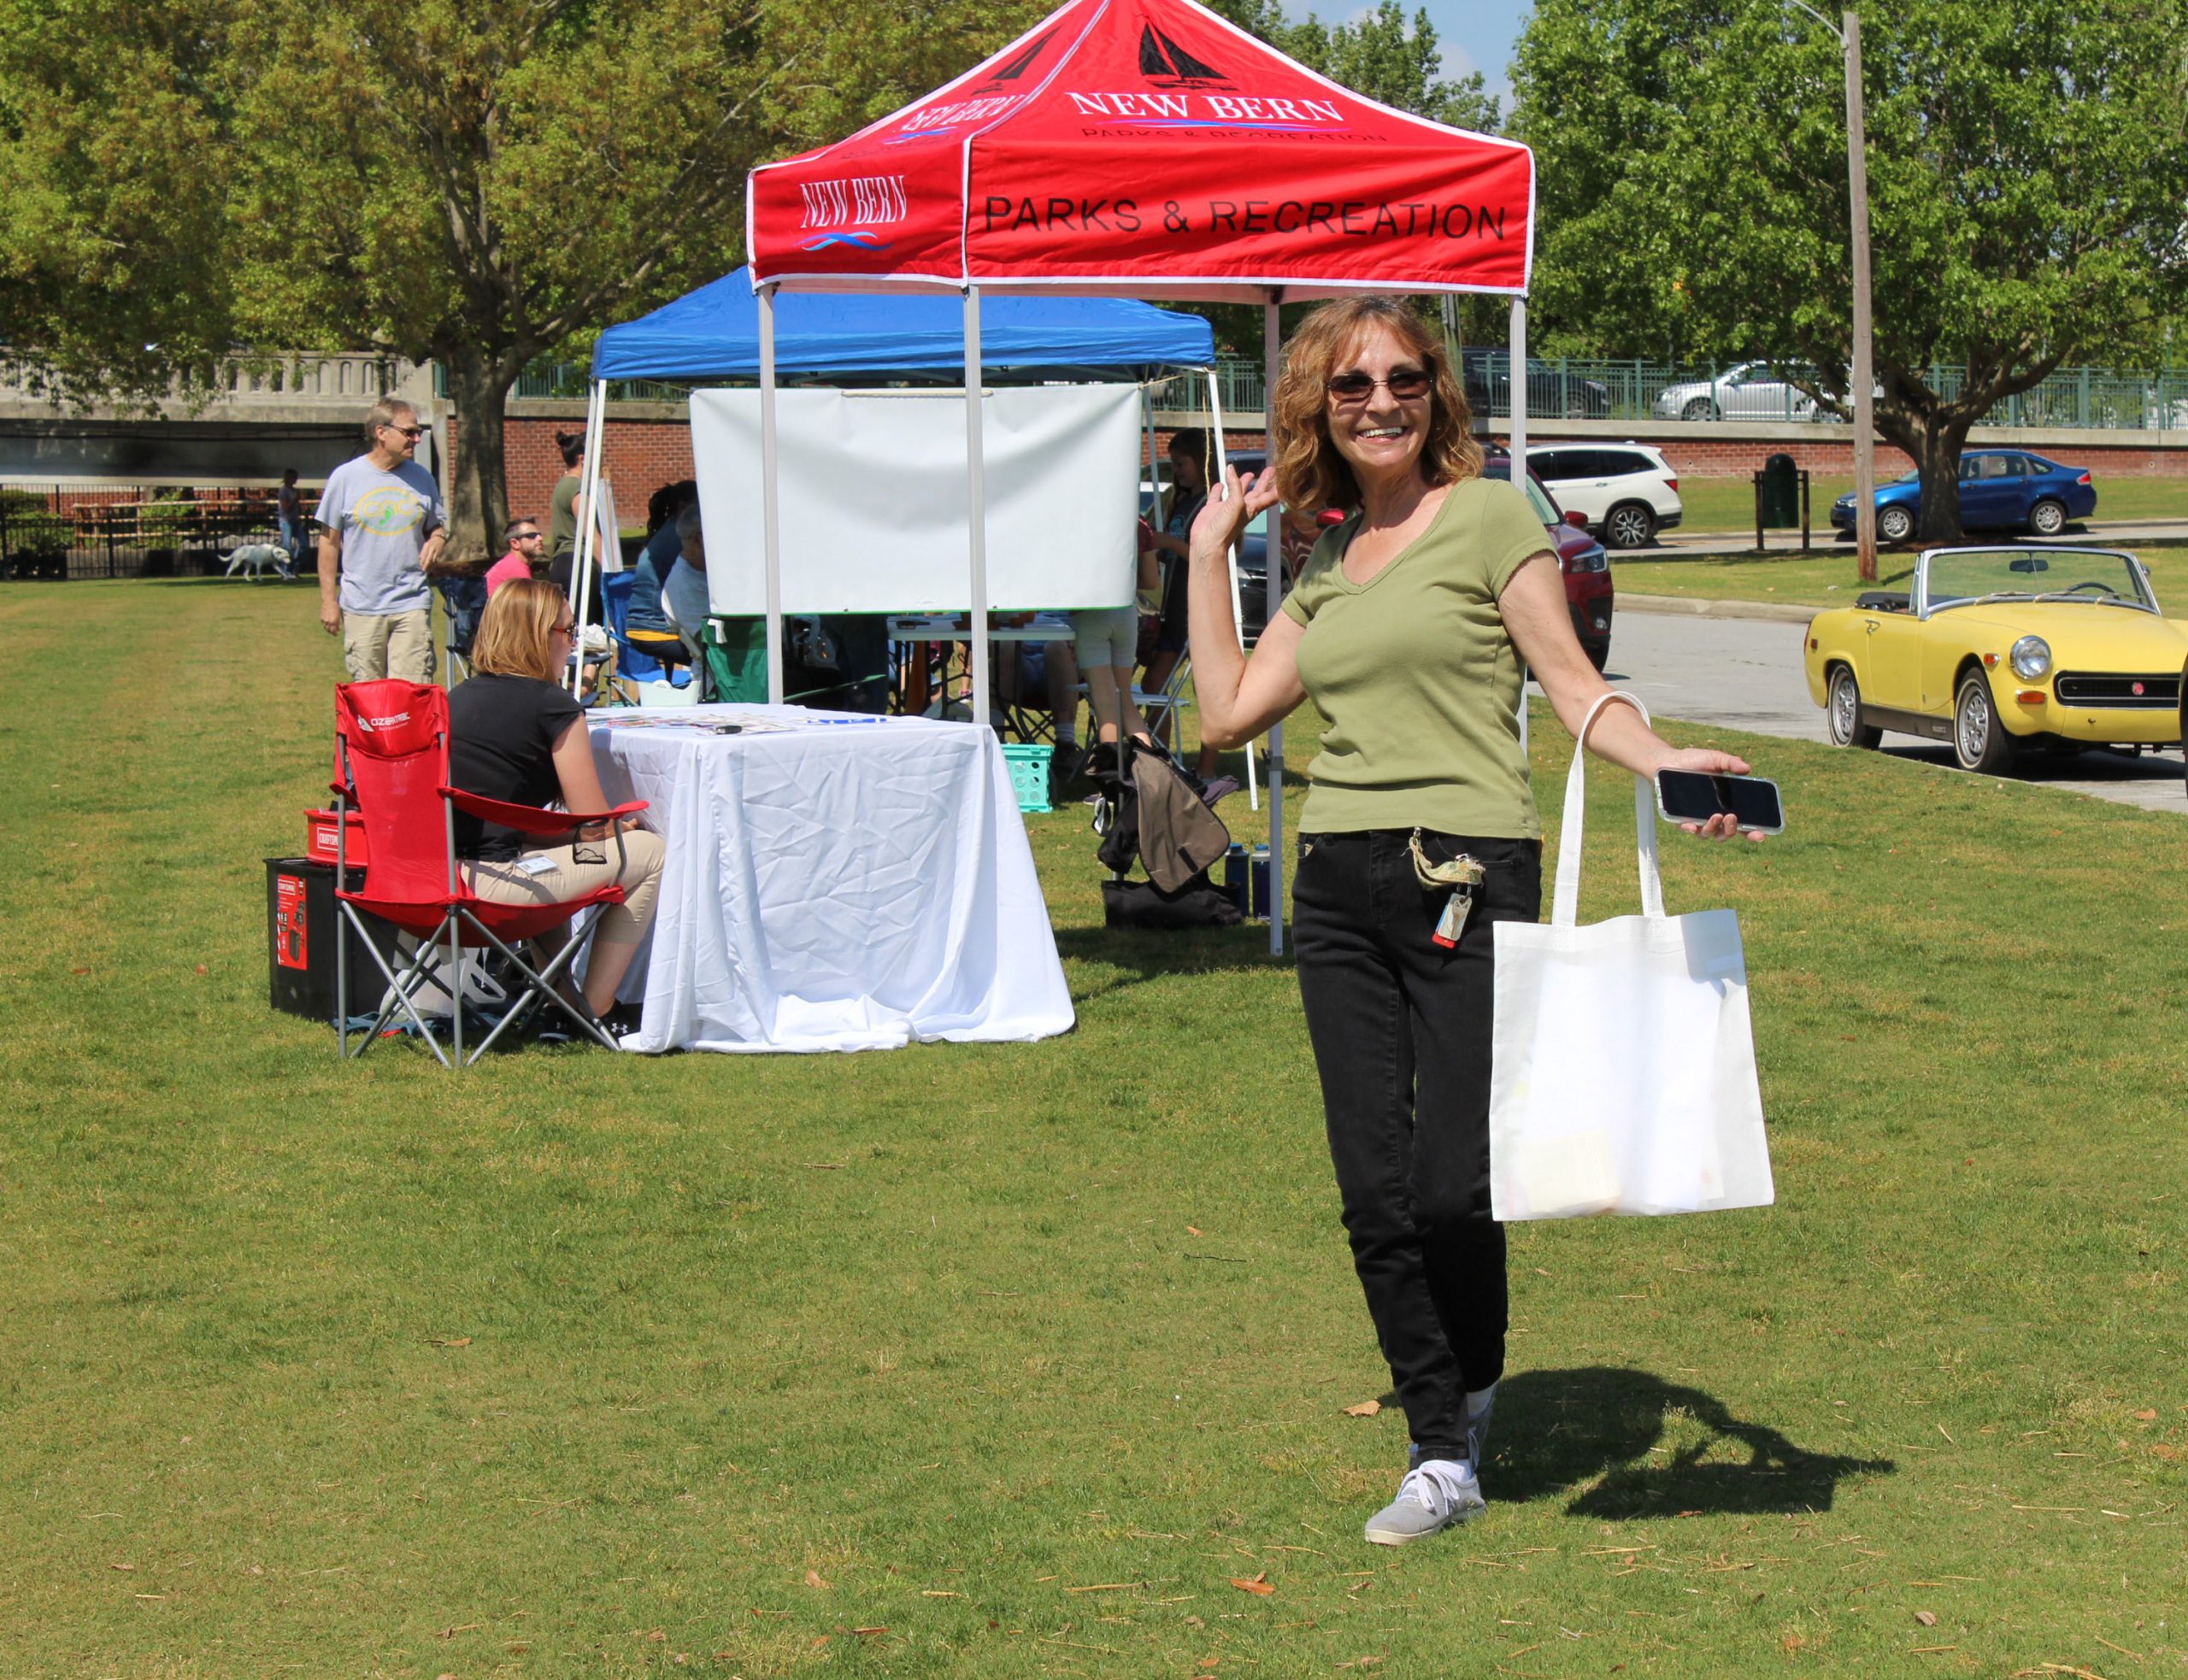 Hanging out at Union Point Park during Earth Day in New Bern NC